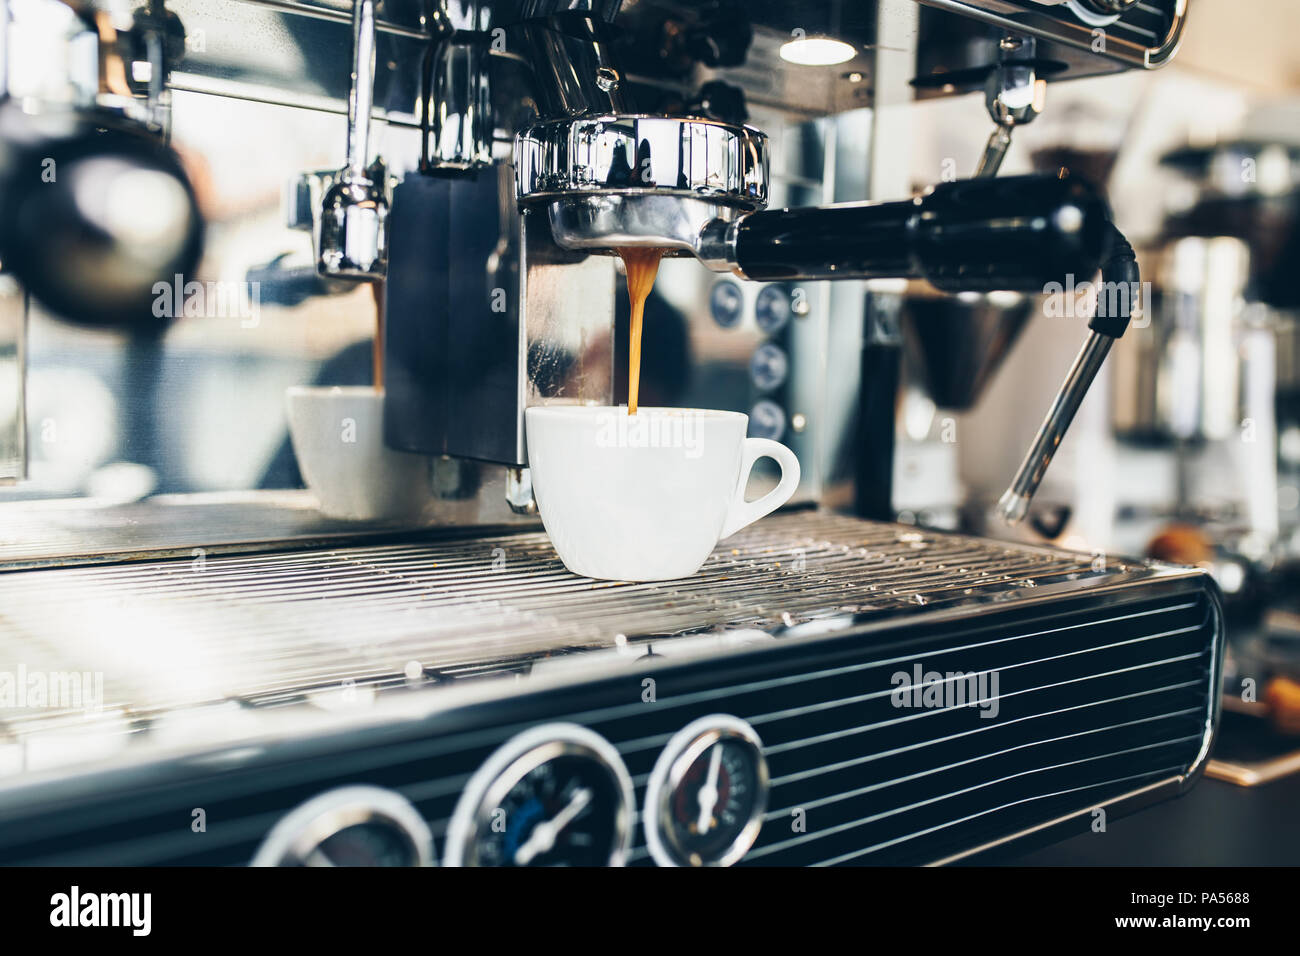 Espresso Pouring From Coffee Machine Into Coffee Cup Stock Photo Alamy